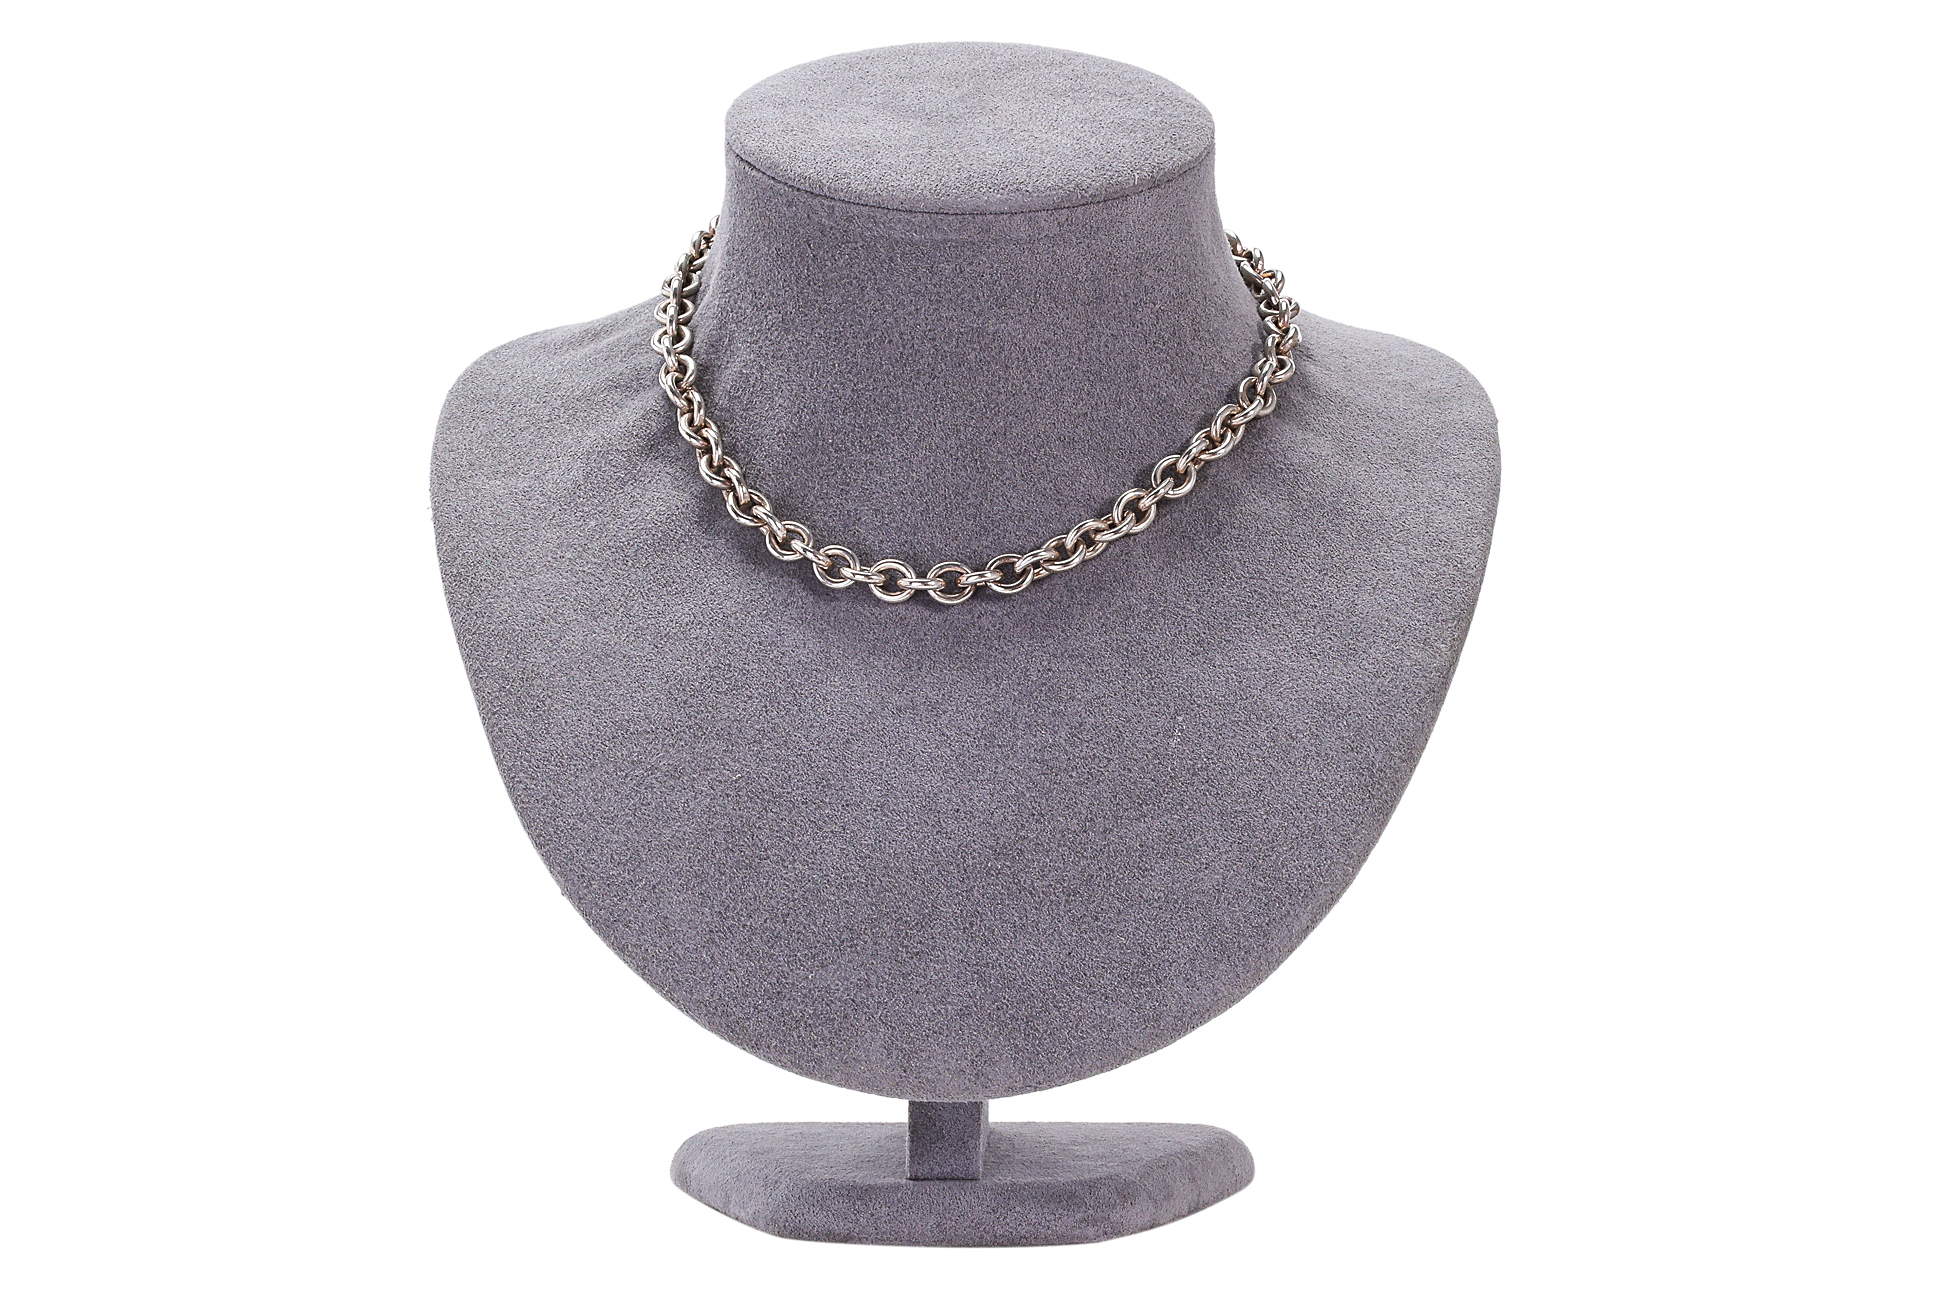 A TIFFANY & CO. OVAL SILVER TAG CHARM CHOKER NECKLACE - Image 3 of 5